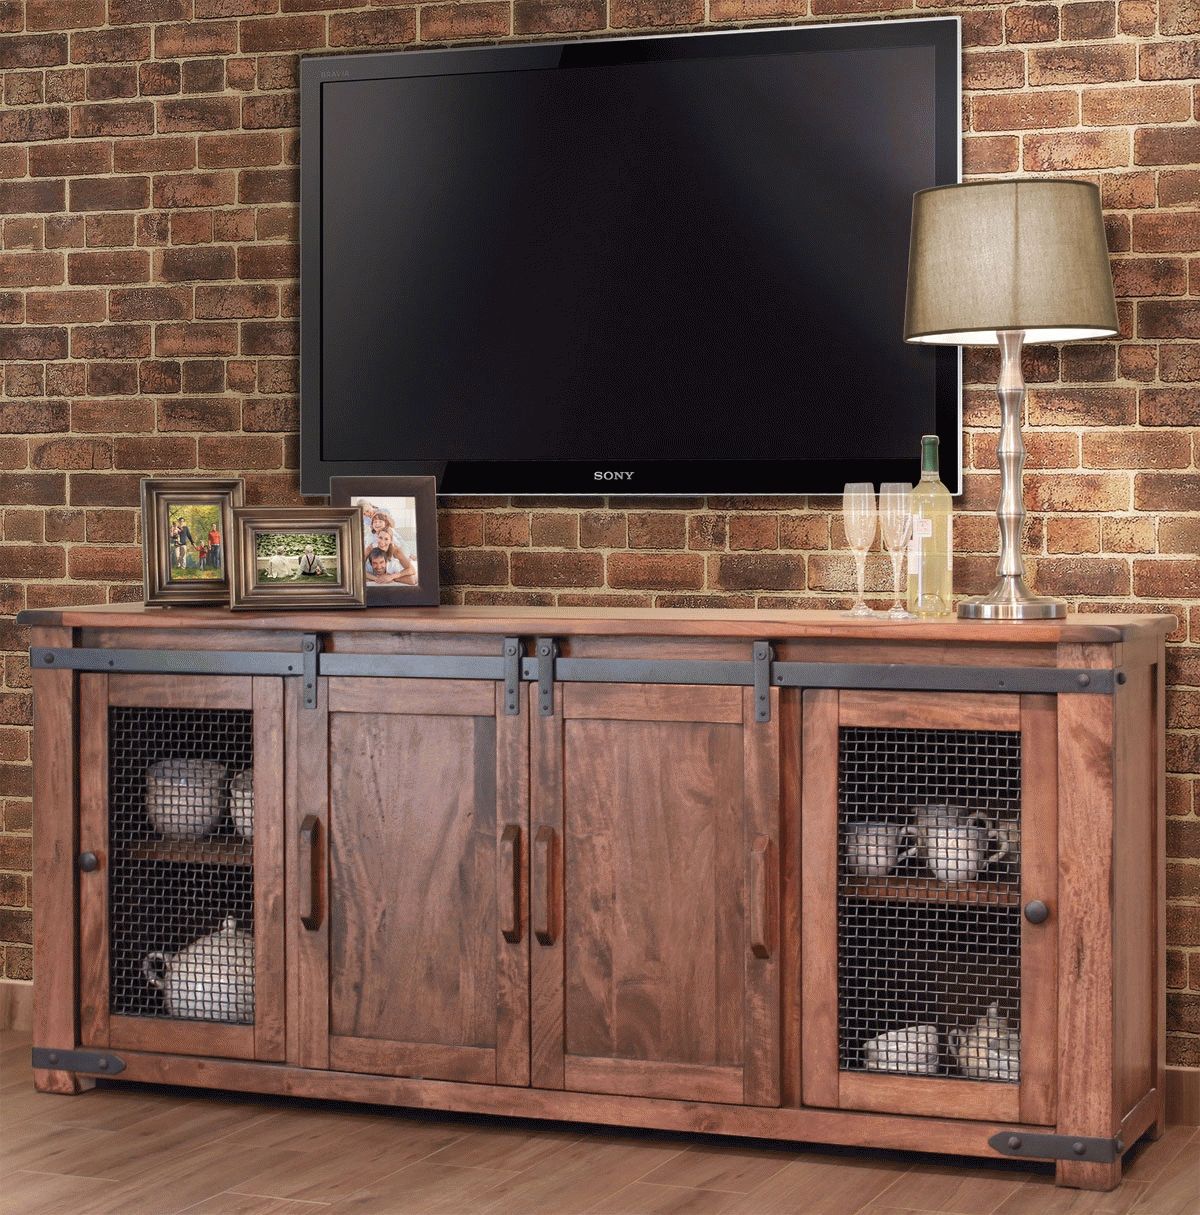 Rustic 70 Inch Tv Stand, 70 Inch Tv Stand, 70 Tv Stand With Regard To Rustic 60 Inch Tv Stands (View 2 of 15)